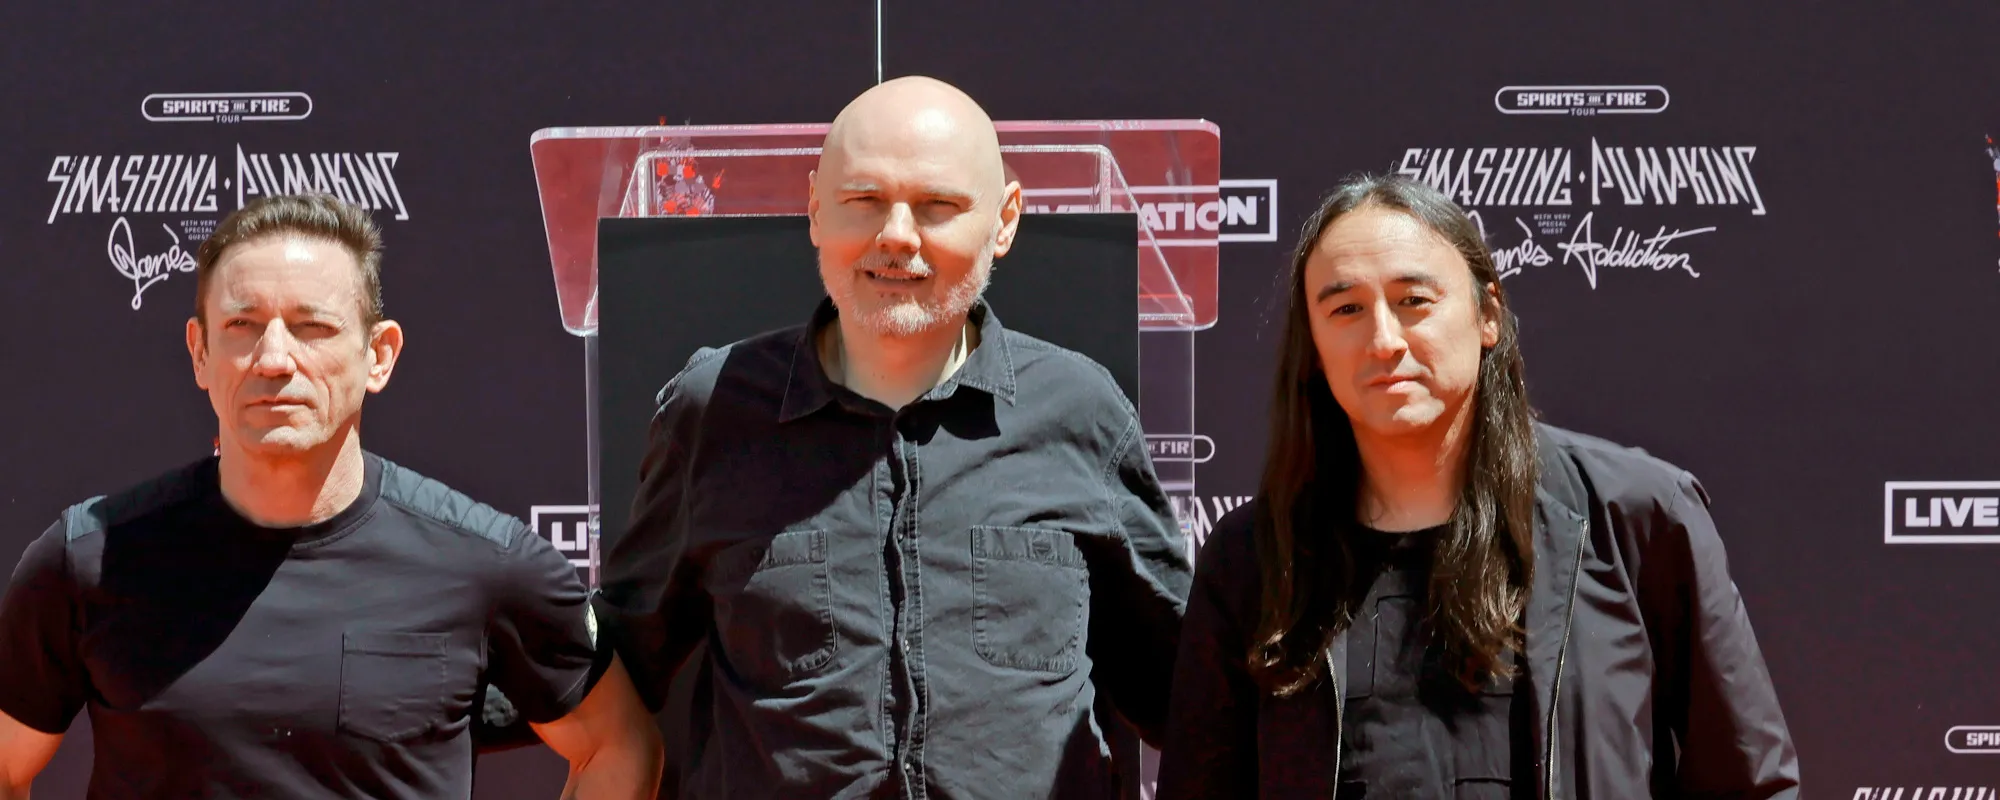 Smashing Pumpkins Guitarist Jeff Schroeder Leaving Band to “Explore a Slightly Different Path”